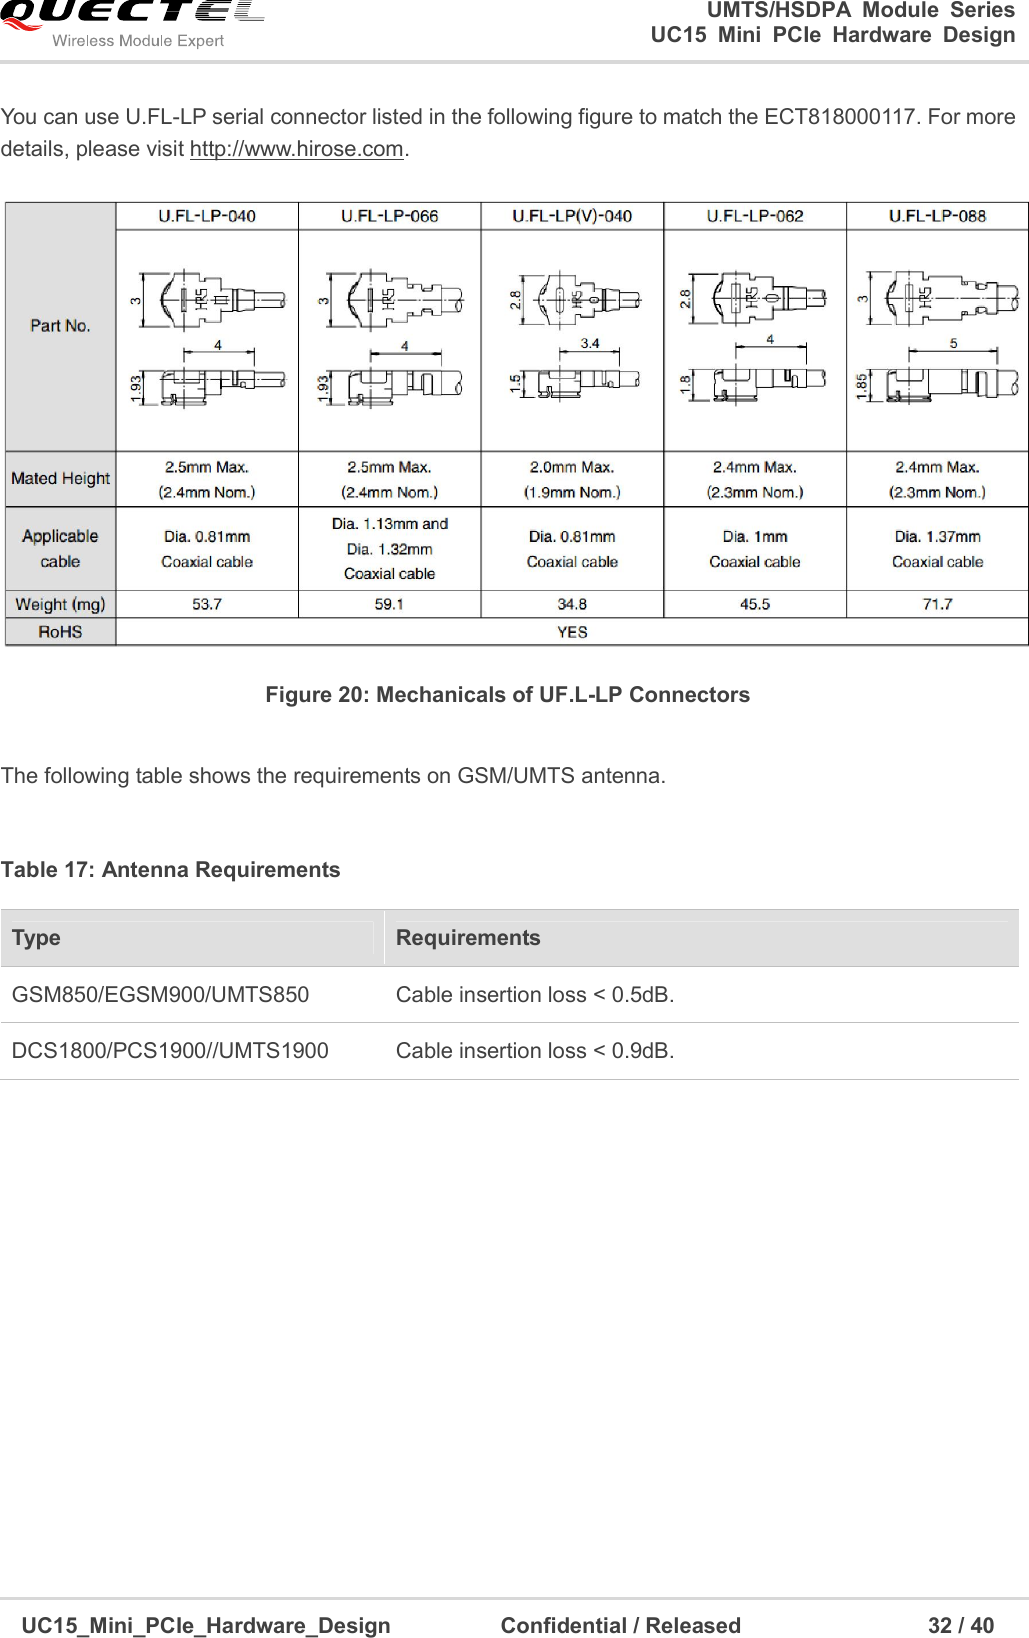                                                                        UMTS/HSDPA  Module  Series                                                          UC15 Mini PCIe Hardware Design  UC15_Mini_PCIe_Hardware_Design                    Confidential / Released                                  32 / 40    You can use U.FL-LP serial connector listed in the following figure to match the ECT818000117. For more details, please visit http://www.hirose.com.  Figure 20: Mechanicals of UF.L-LP Connectors  The following table shows the requirements on GSM/UMTS antenna.  Table 17: Antenna Requirements  Type  Requirements GSM850/EGSM900/UMTS850  Cable insertion loss &lt; 0.5dB. DCS1800/PCS1900//UMTS1900  Cable insertion loss &lt; 0.9dB. 